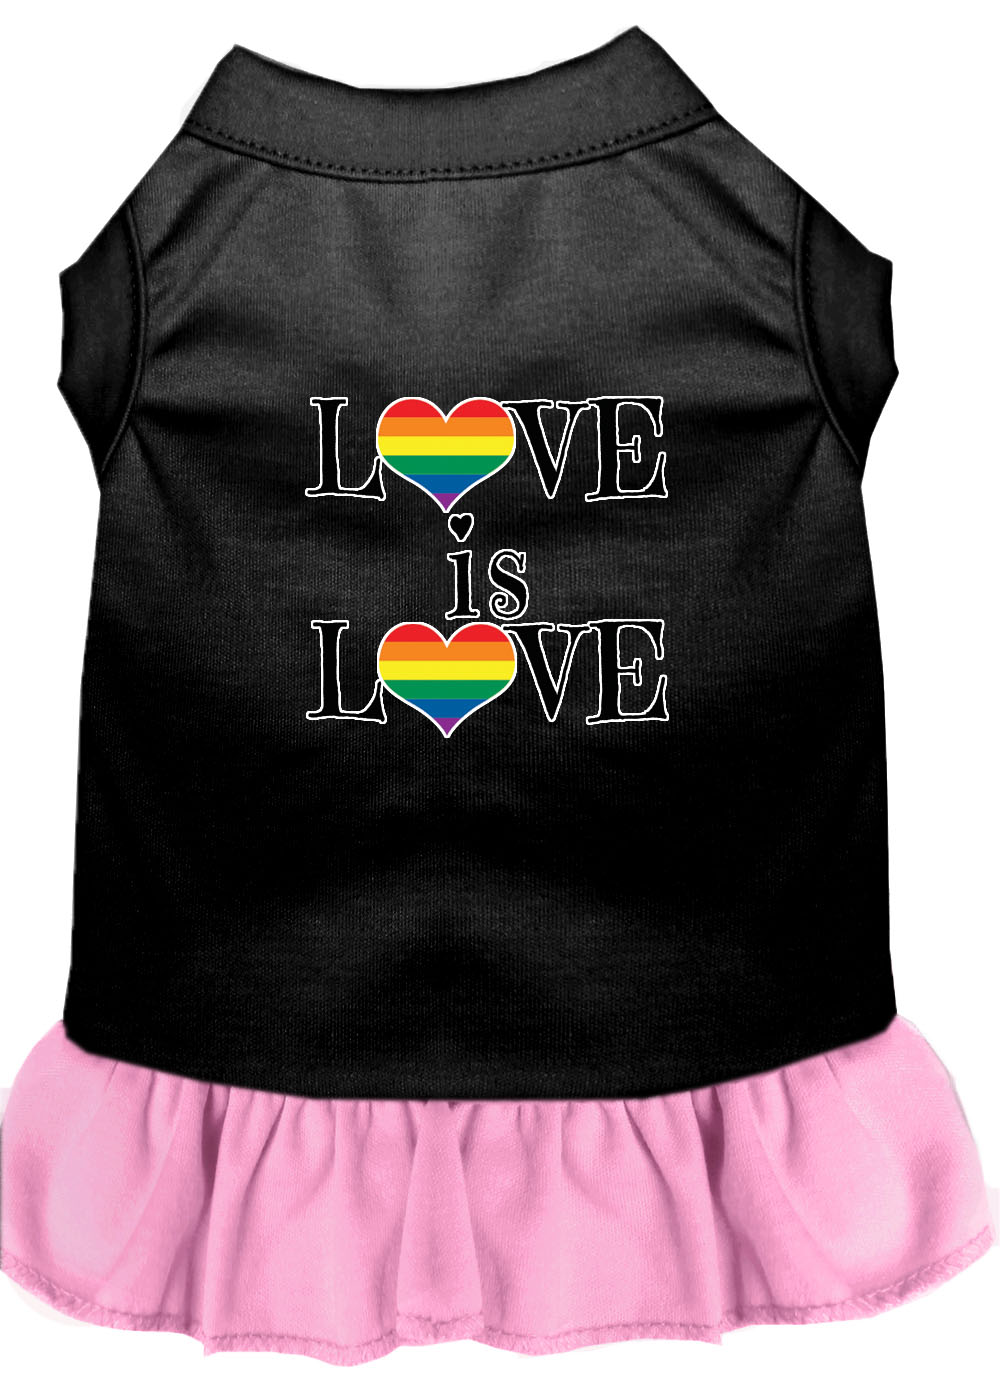 Love is Love Screen Print Dog Dress Black with Light Pink Med